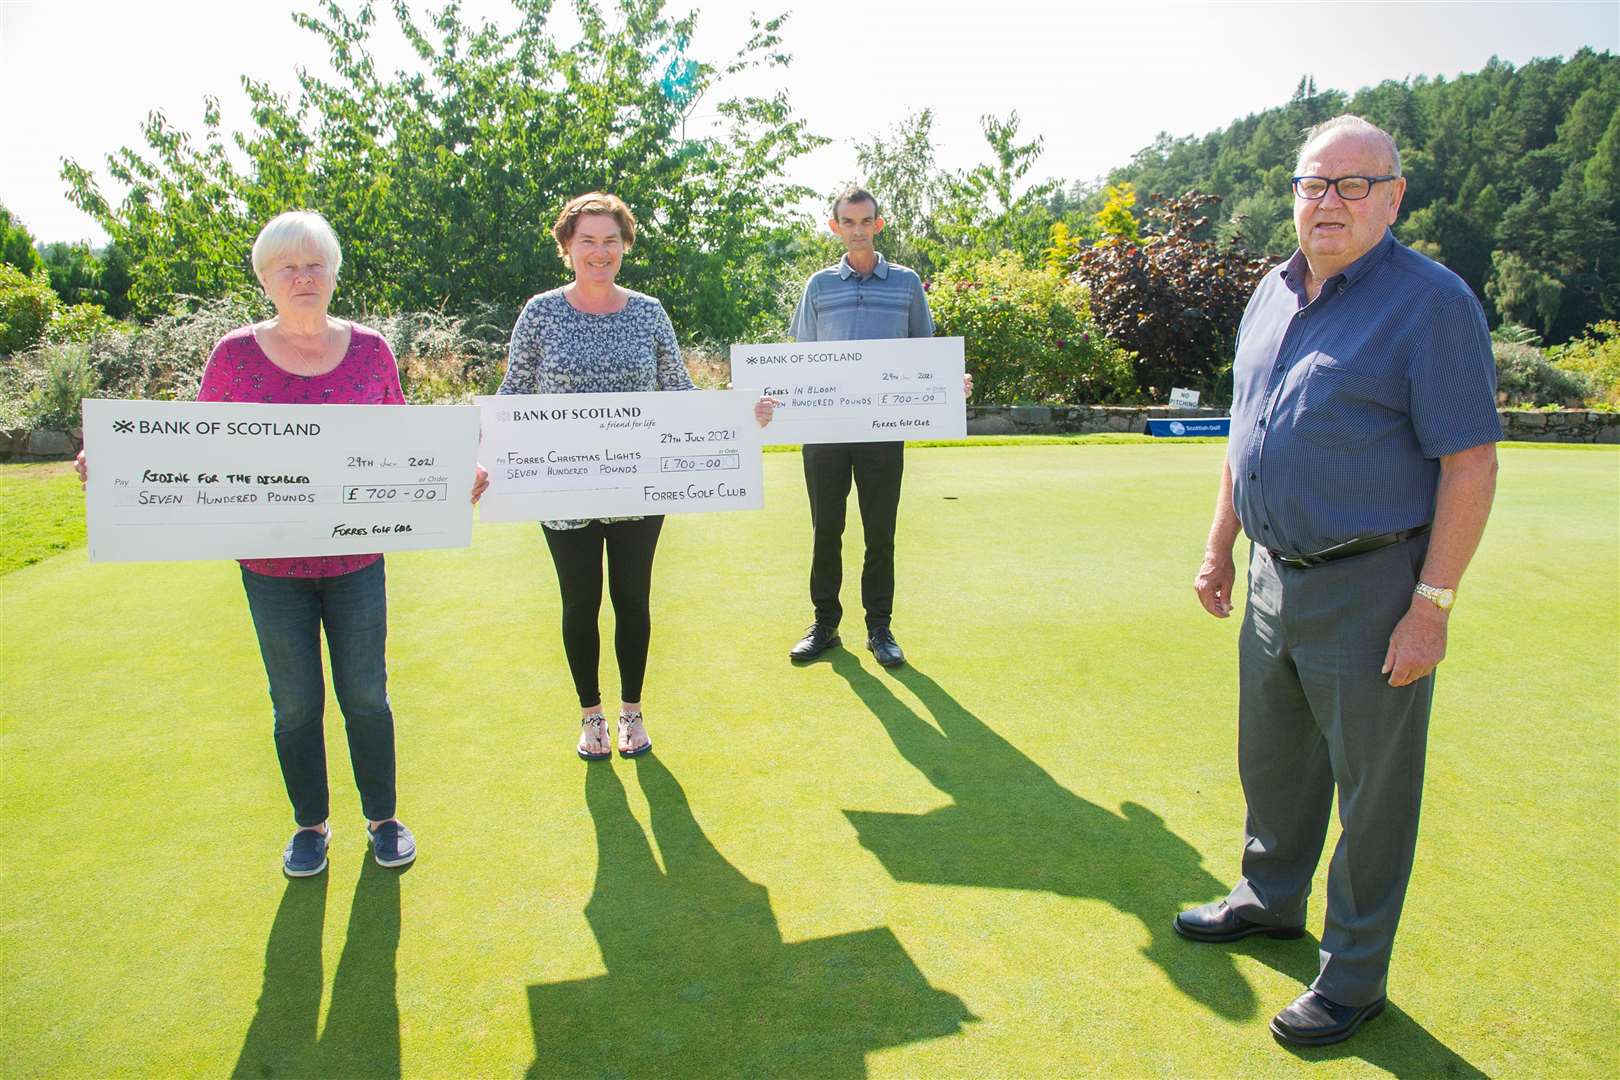 Flicker handing over cheques to Jan Thorne of Riding for the Disabled, Ali Noel of Forres Christmas Lights and Colin Mackay of Forres Golf Club on behalf of Forres in Bloom.